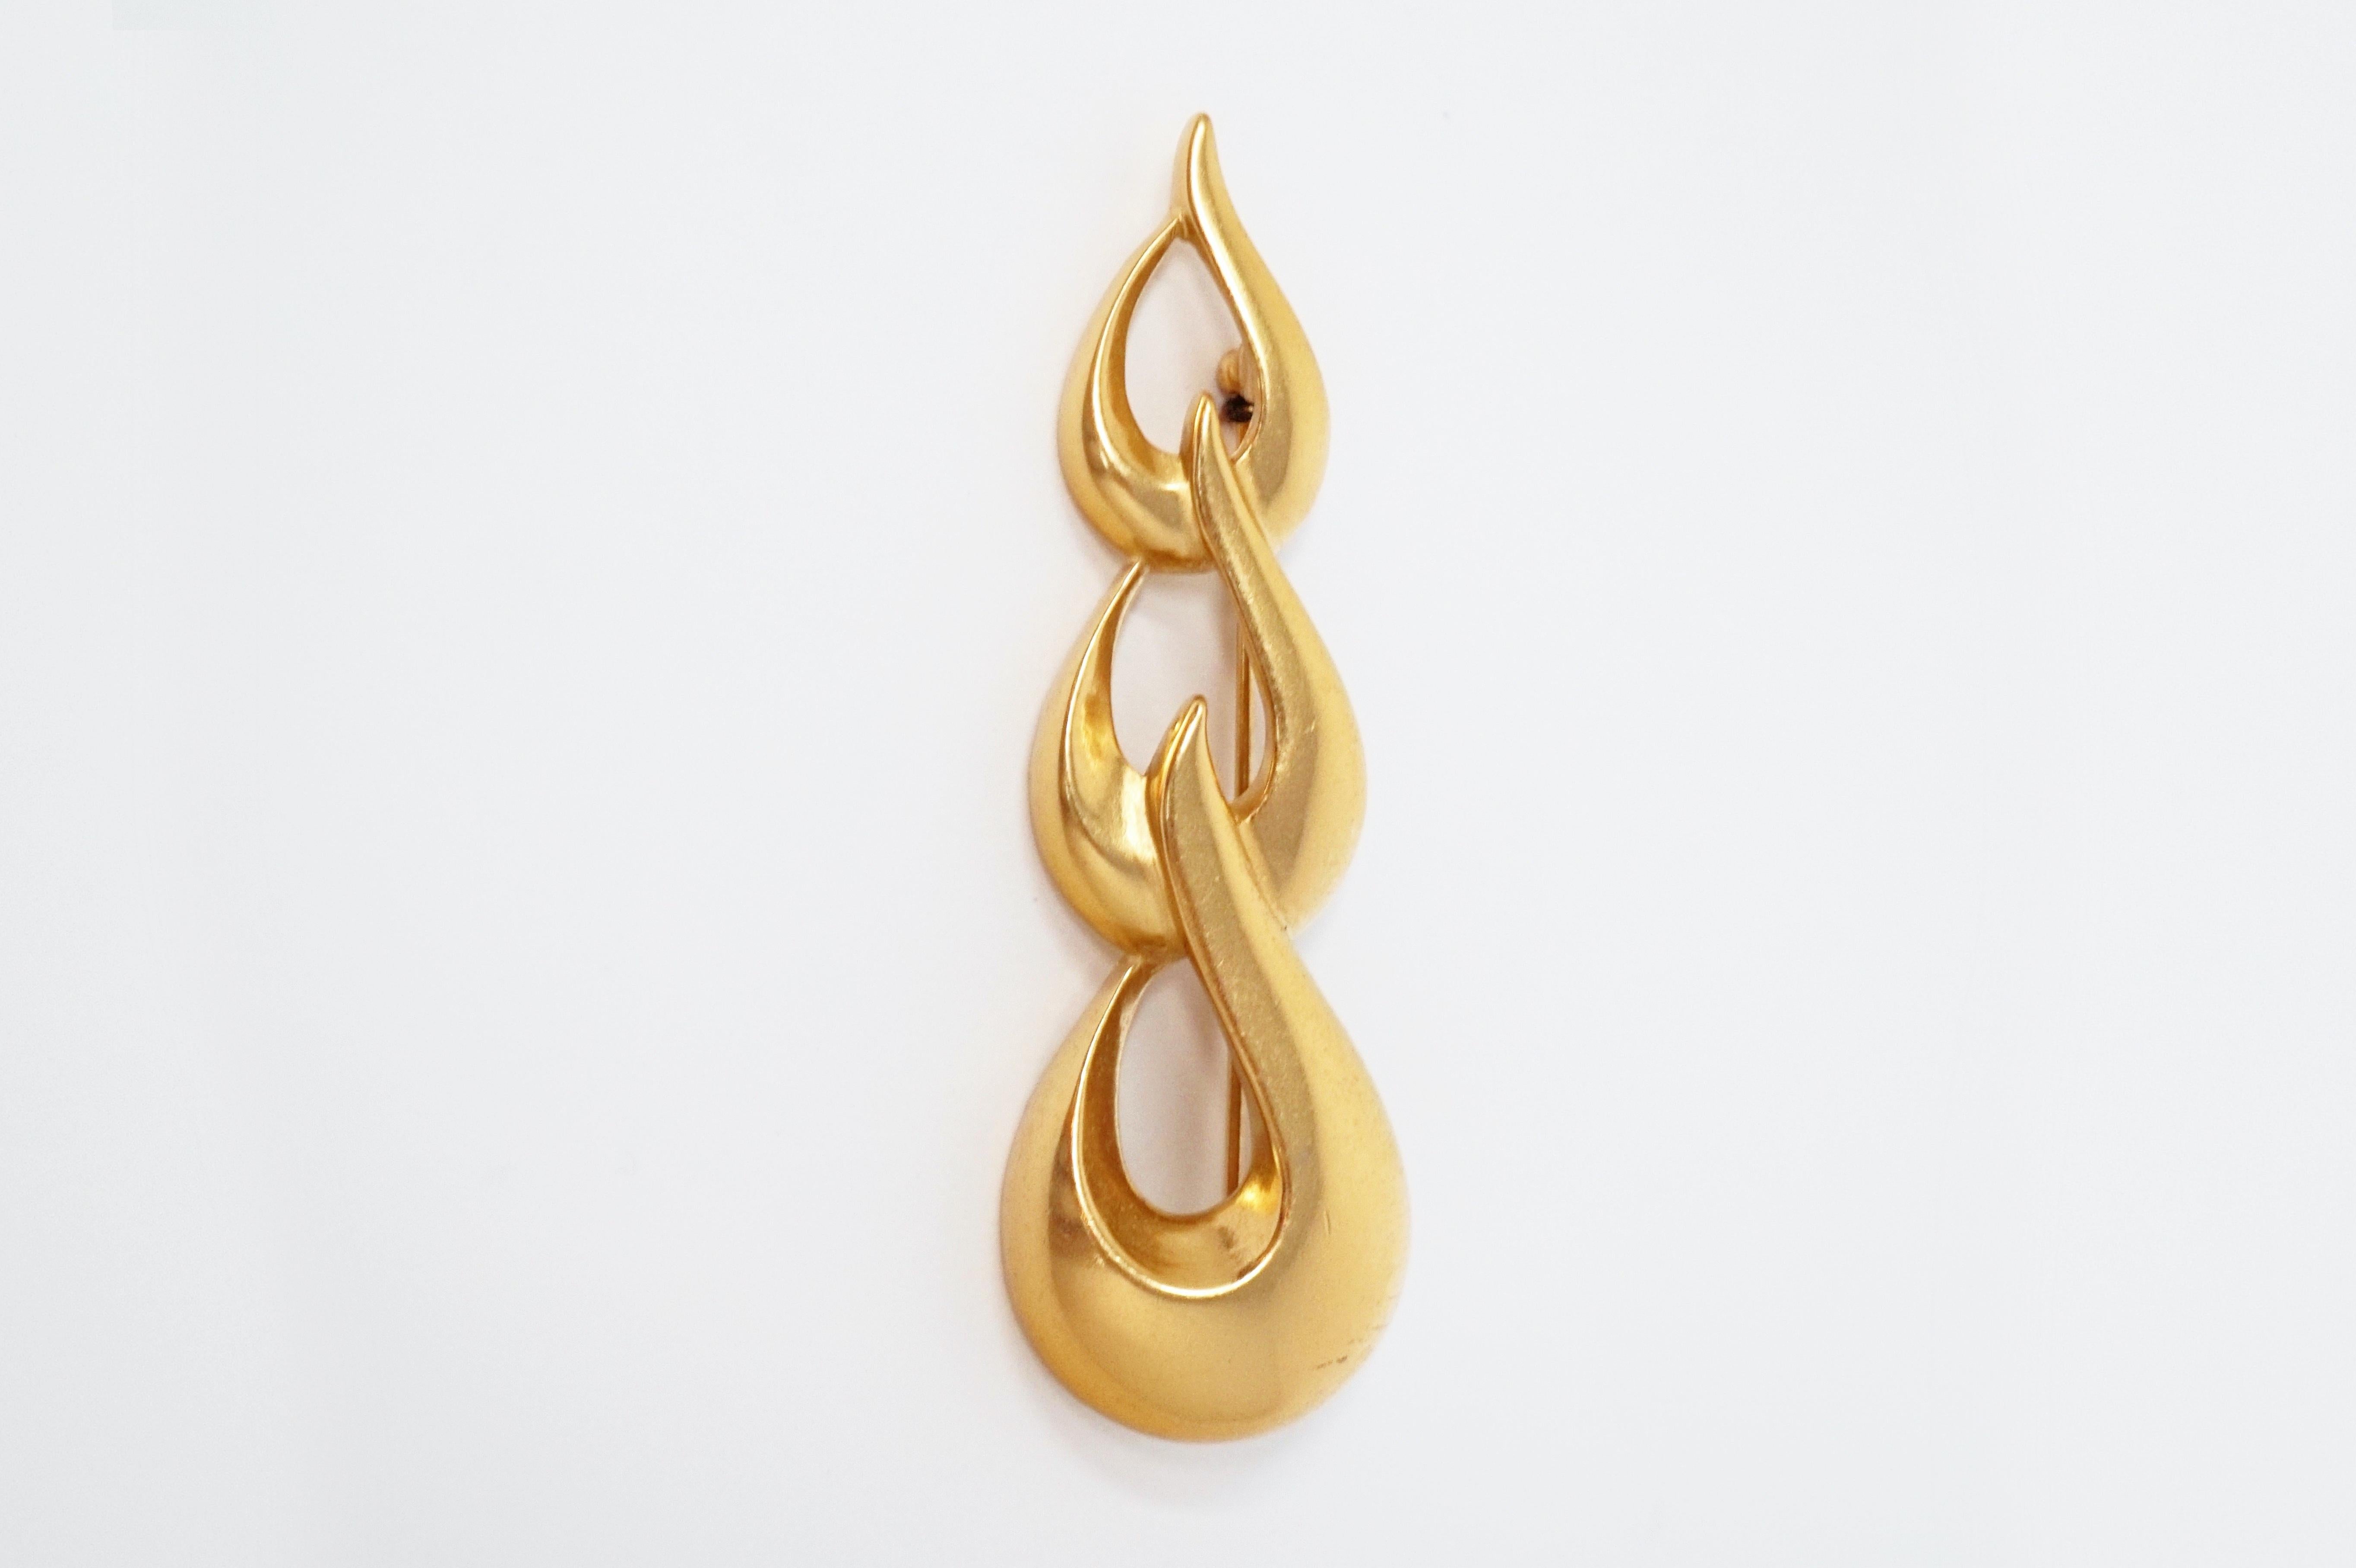 This gorgeous gilt brooch by Monet, circa 1970s, is a wonderful example of the quality and innovative designs that the coveted vintage costume jewelry brand is known for.  With a satin gold-plated finish, this abstract brooch can be styled with